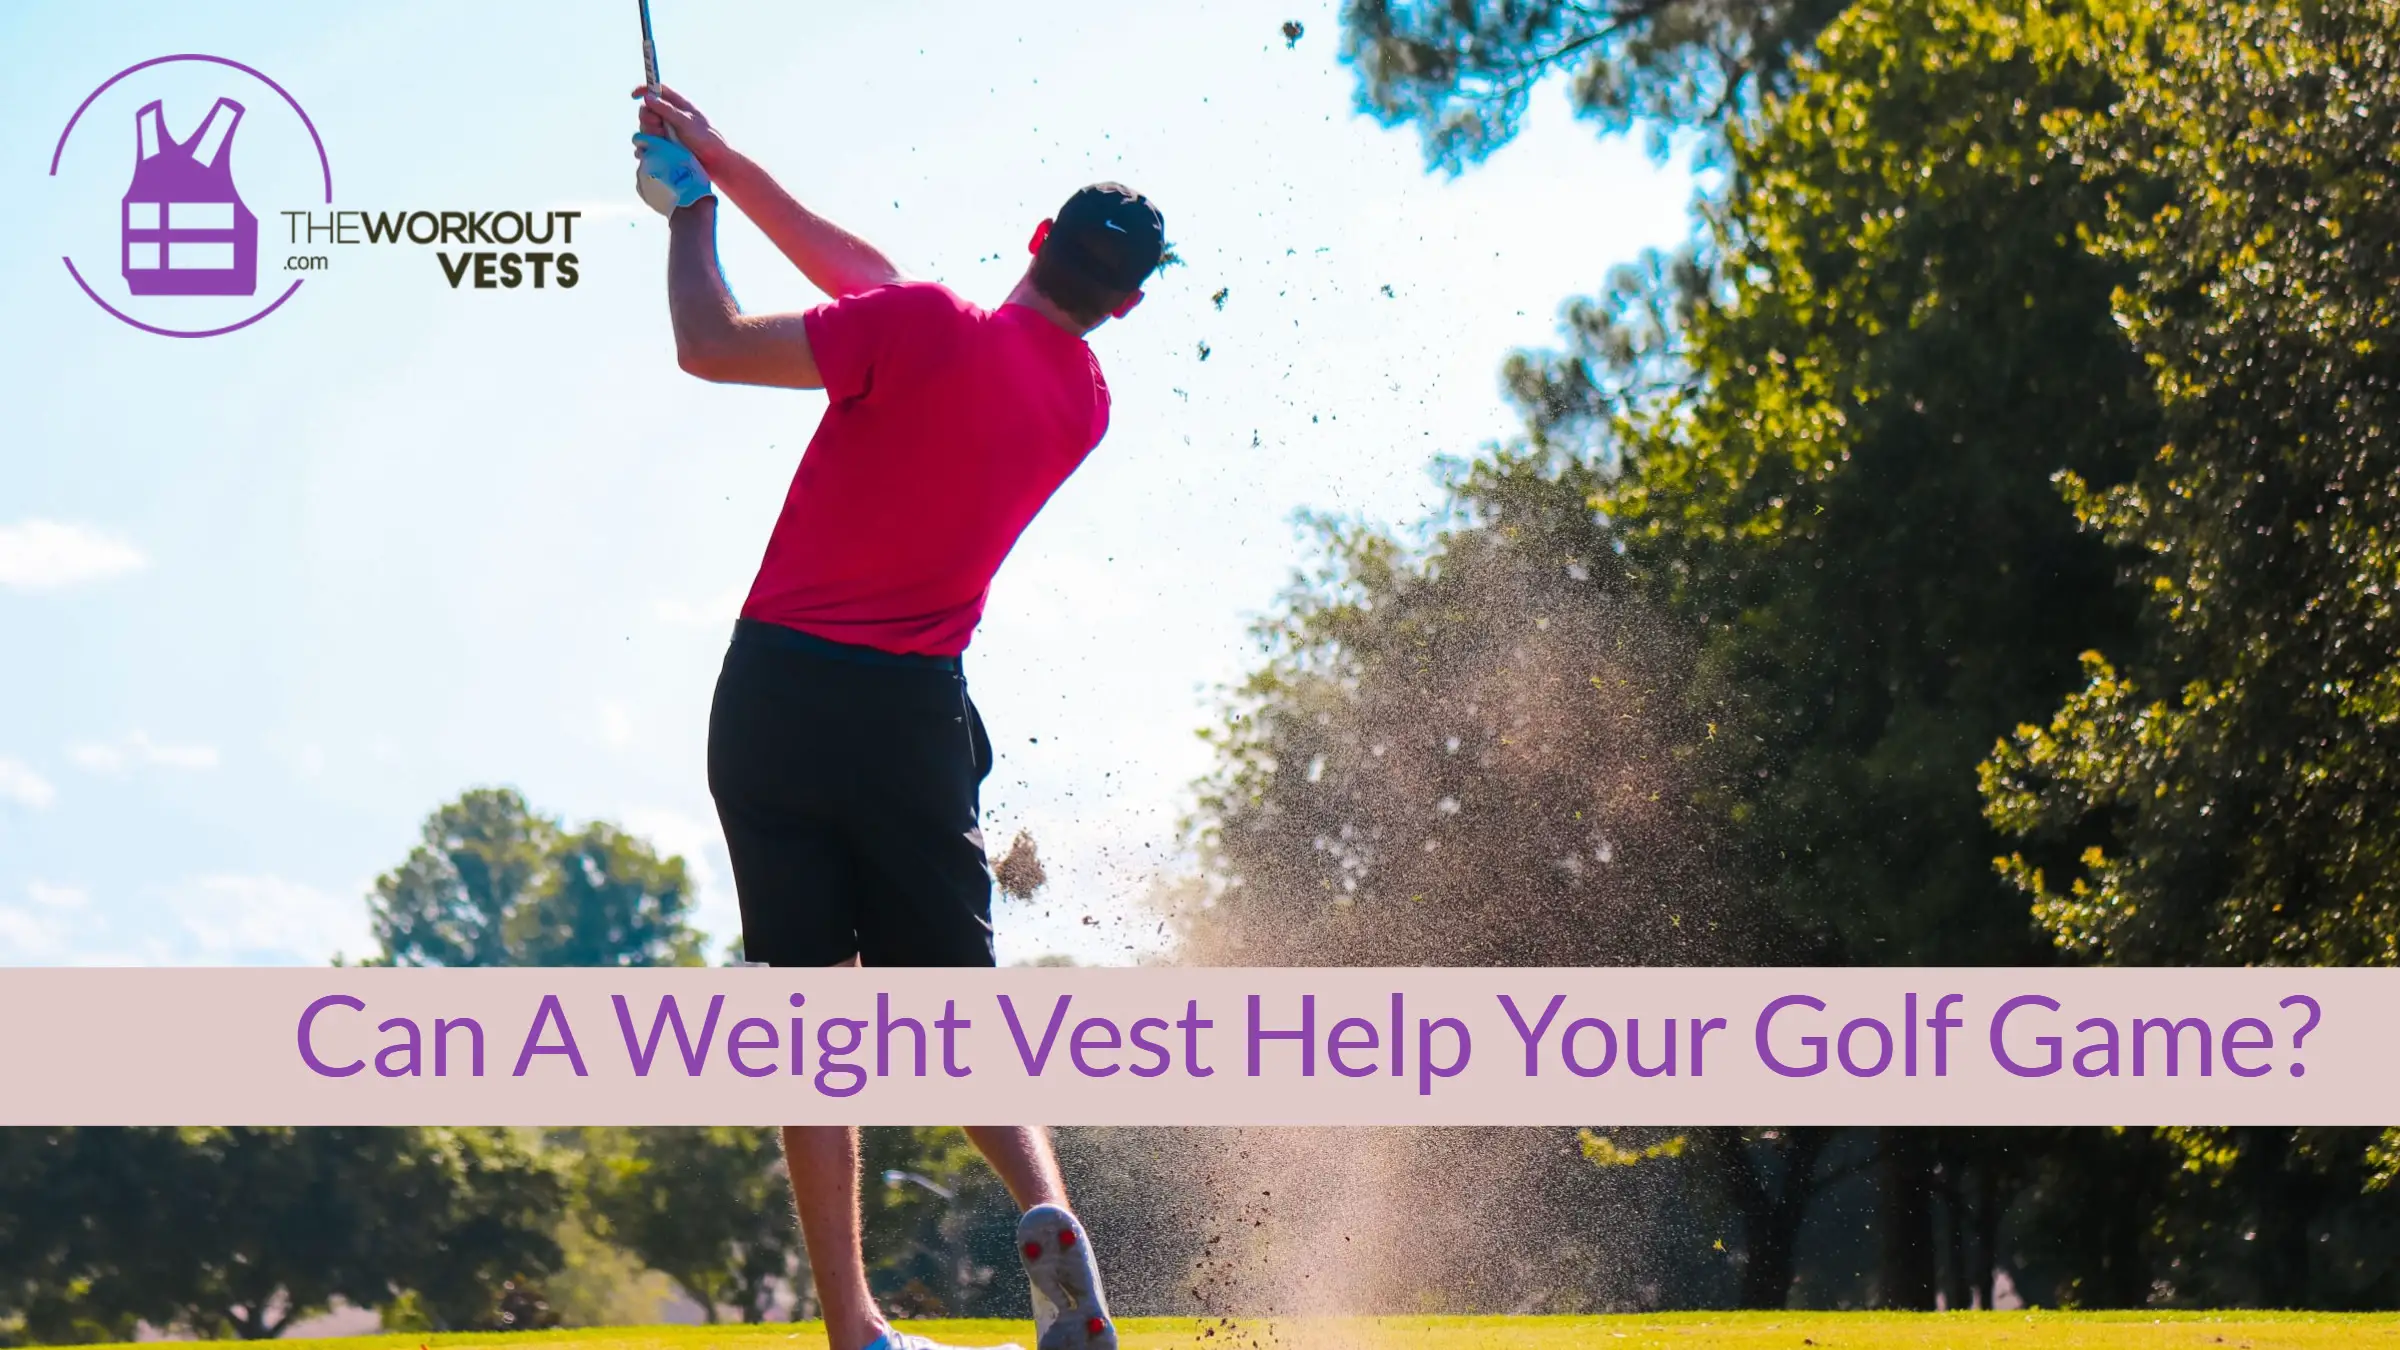 Will A Weighted Vest Help Your Golf Game?